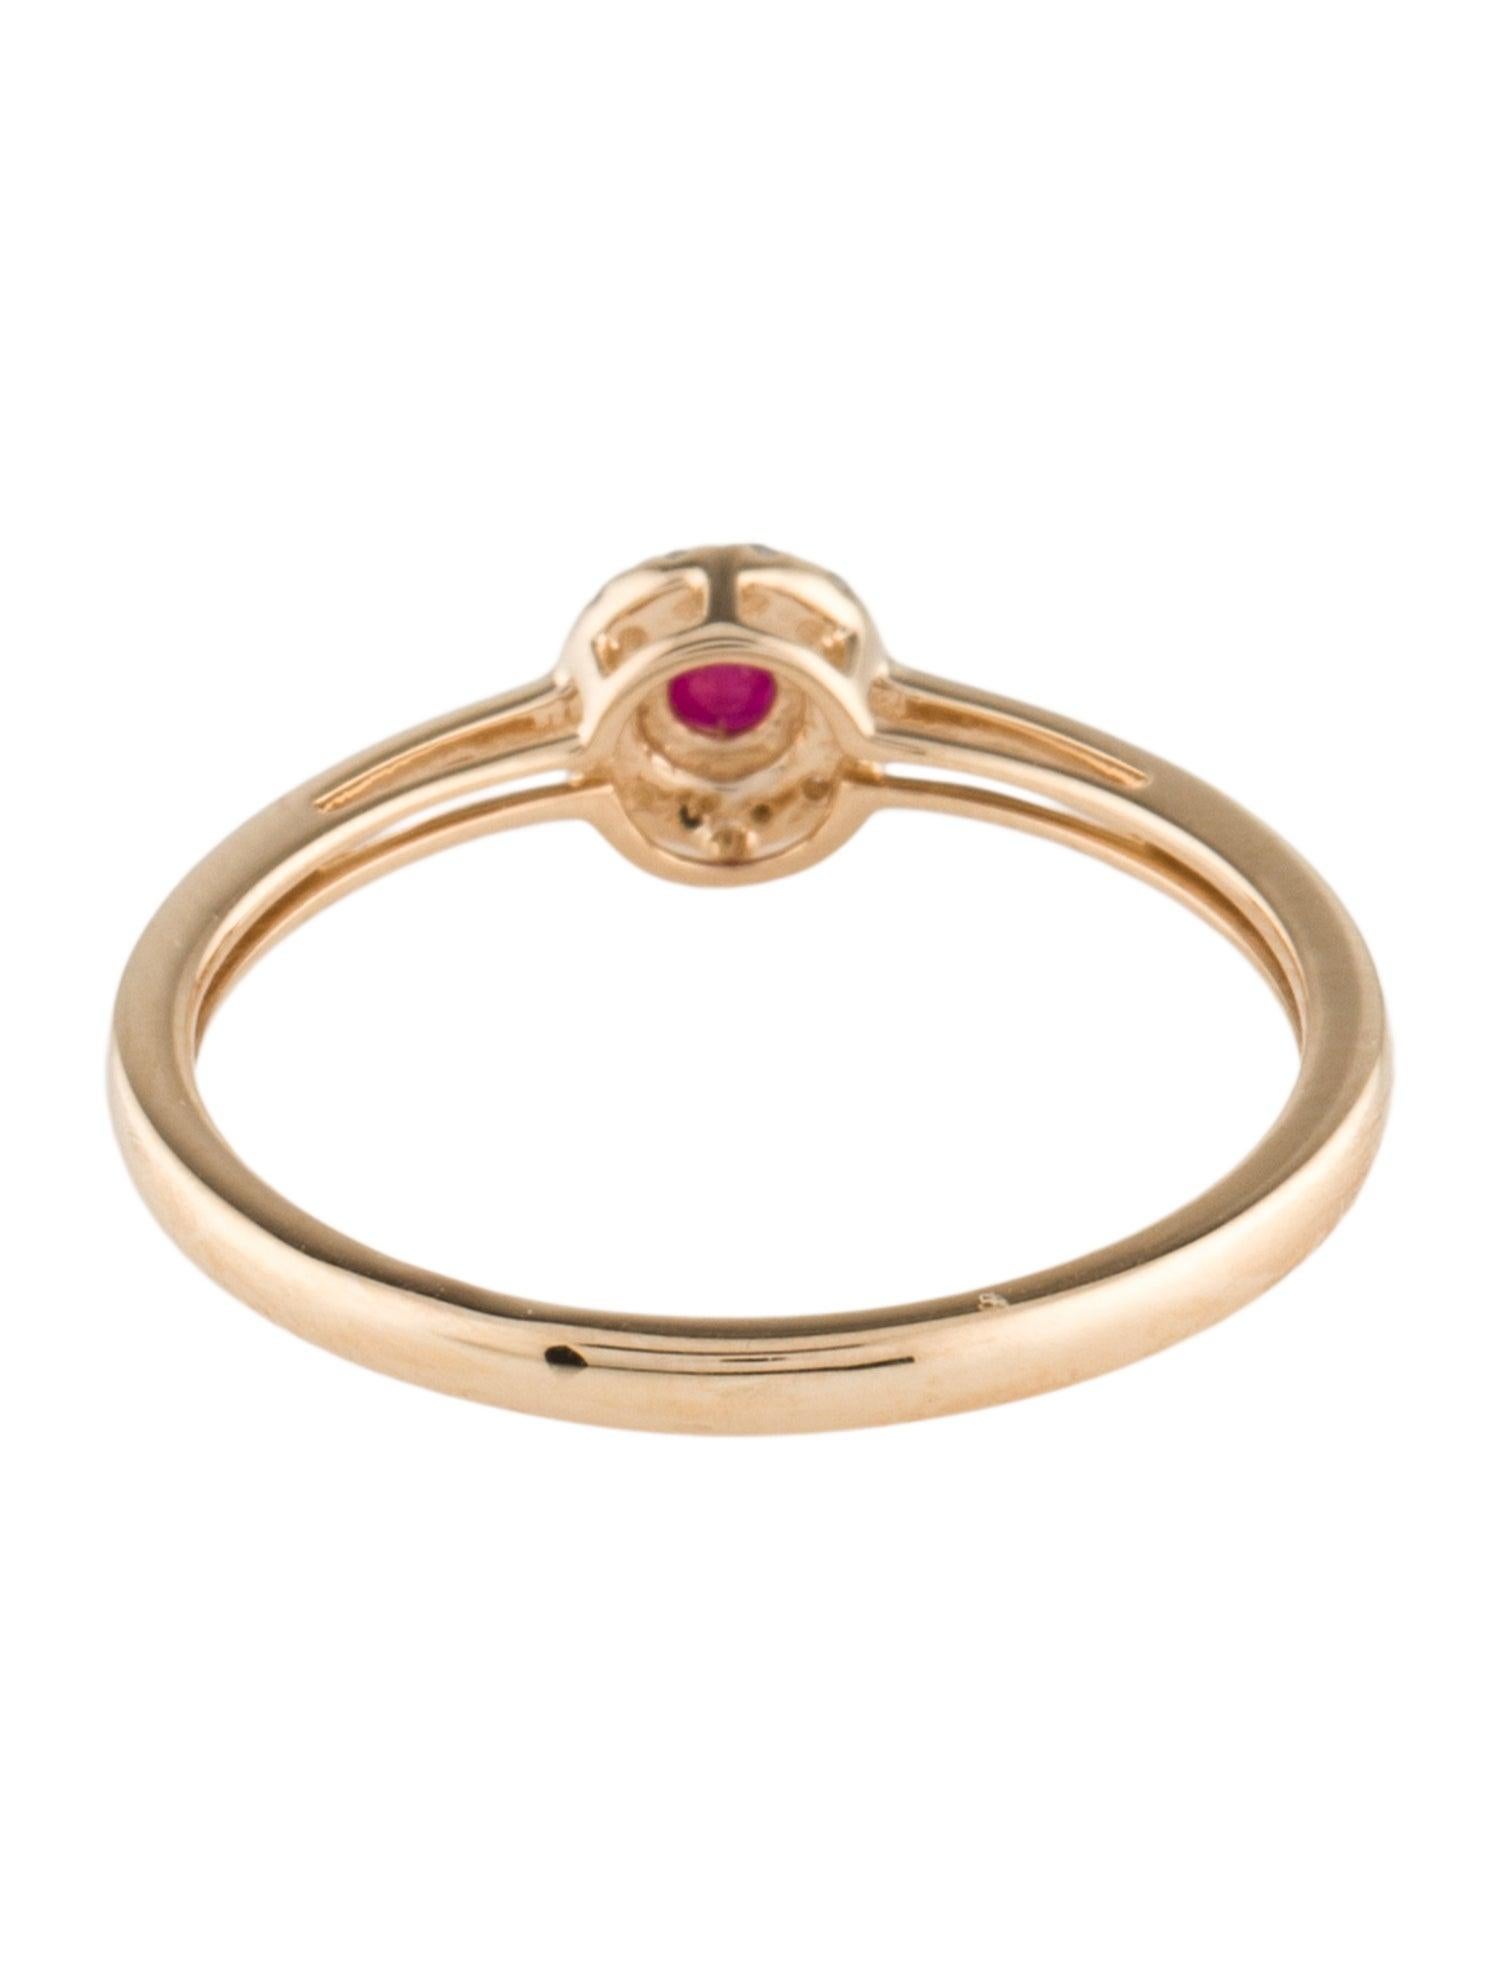 14K Yellow Gold Thin Cocktail Ring with 0.14ct Ruby and 0.06ct Diamond Accents In New Condition For Sale In Holtsville, NY